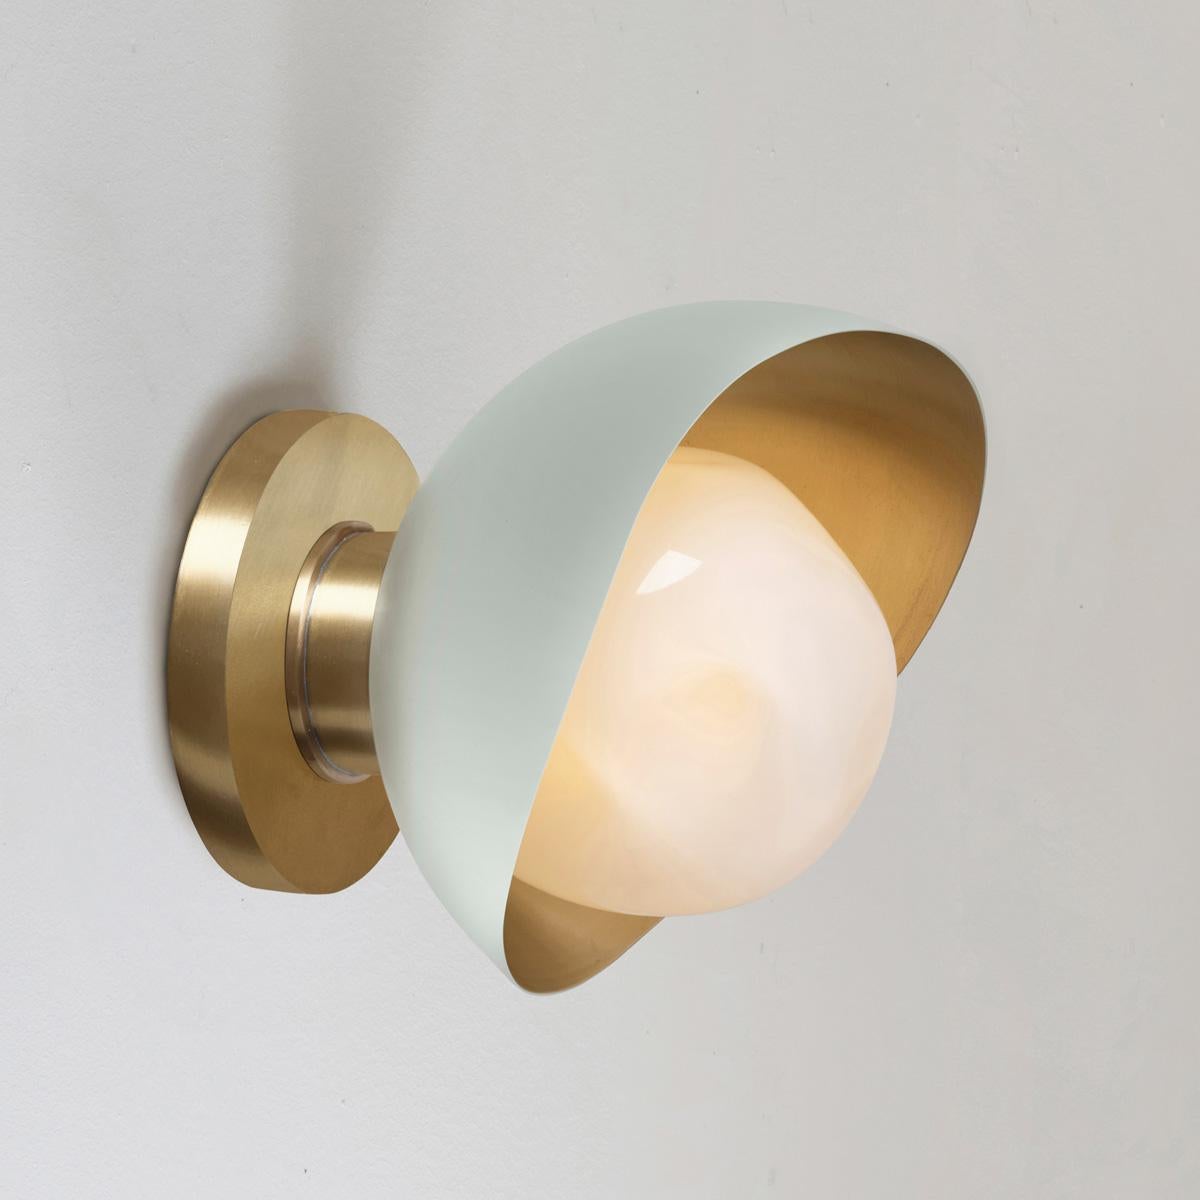 Modern Perla Mini Wall Light by Gaspare Asaro. Sand White and Satin Brass Finish For Sale